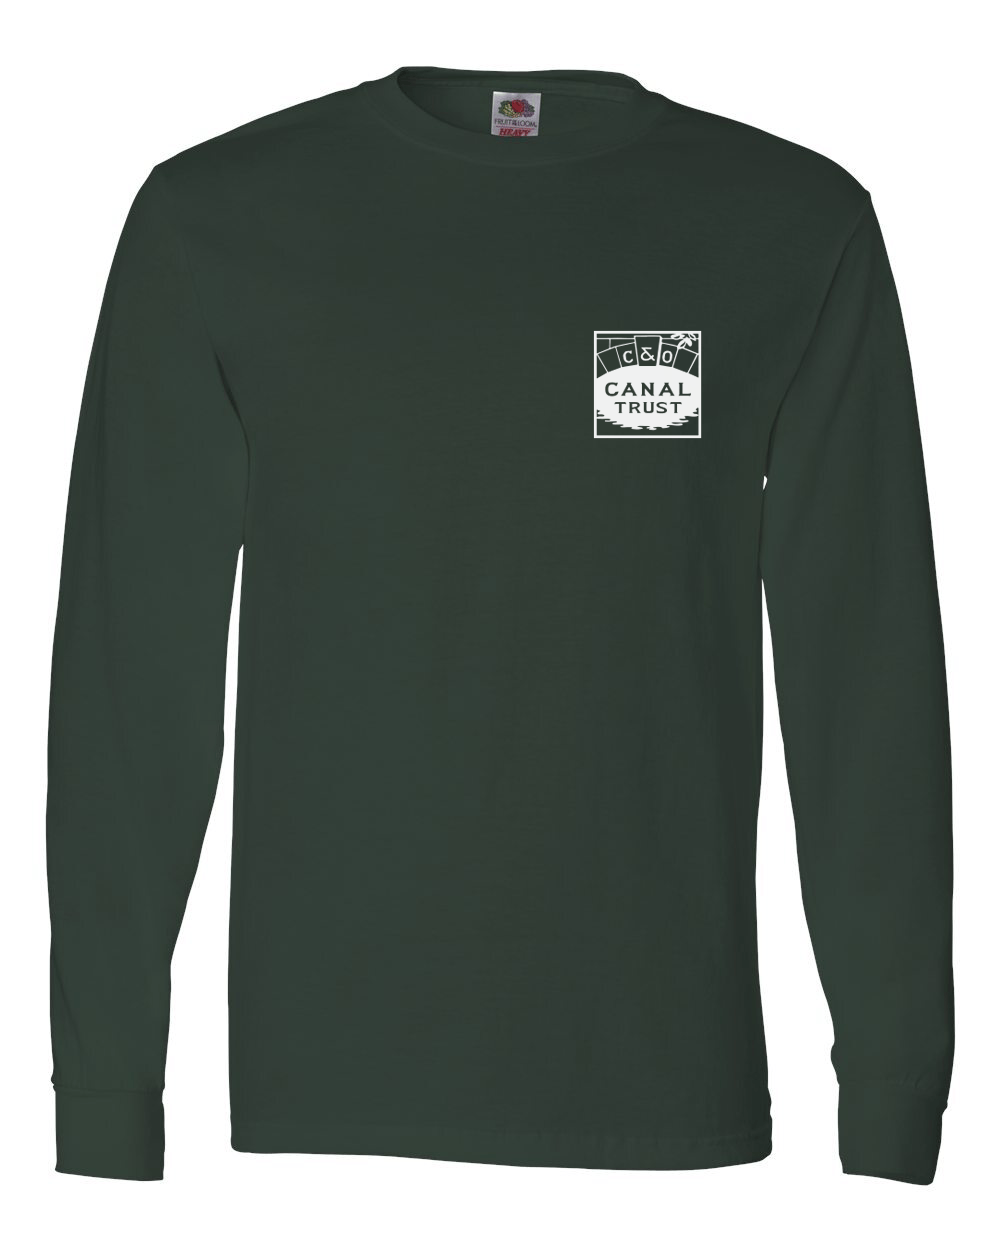 C&O Canal Bike in Nature (Forest Green) / Long Sleeve Shirt - Route One Apparel